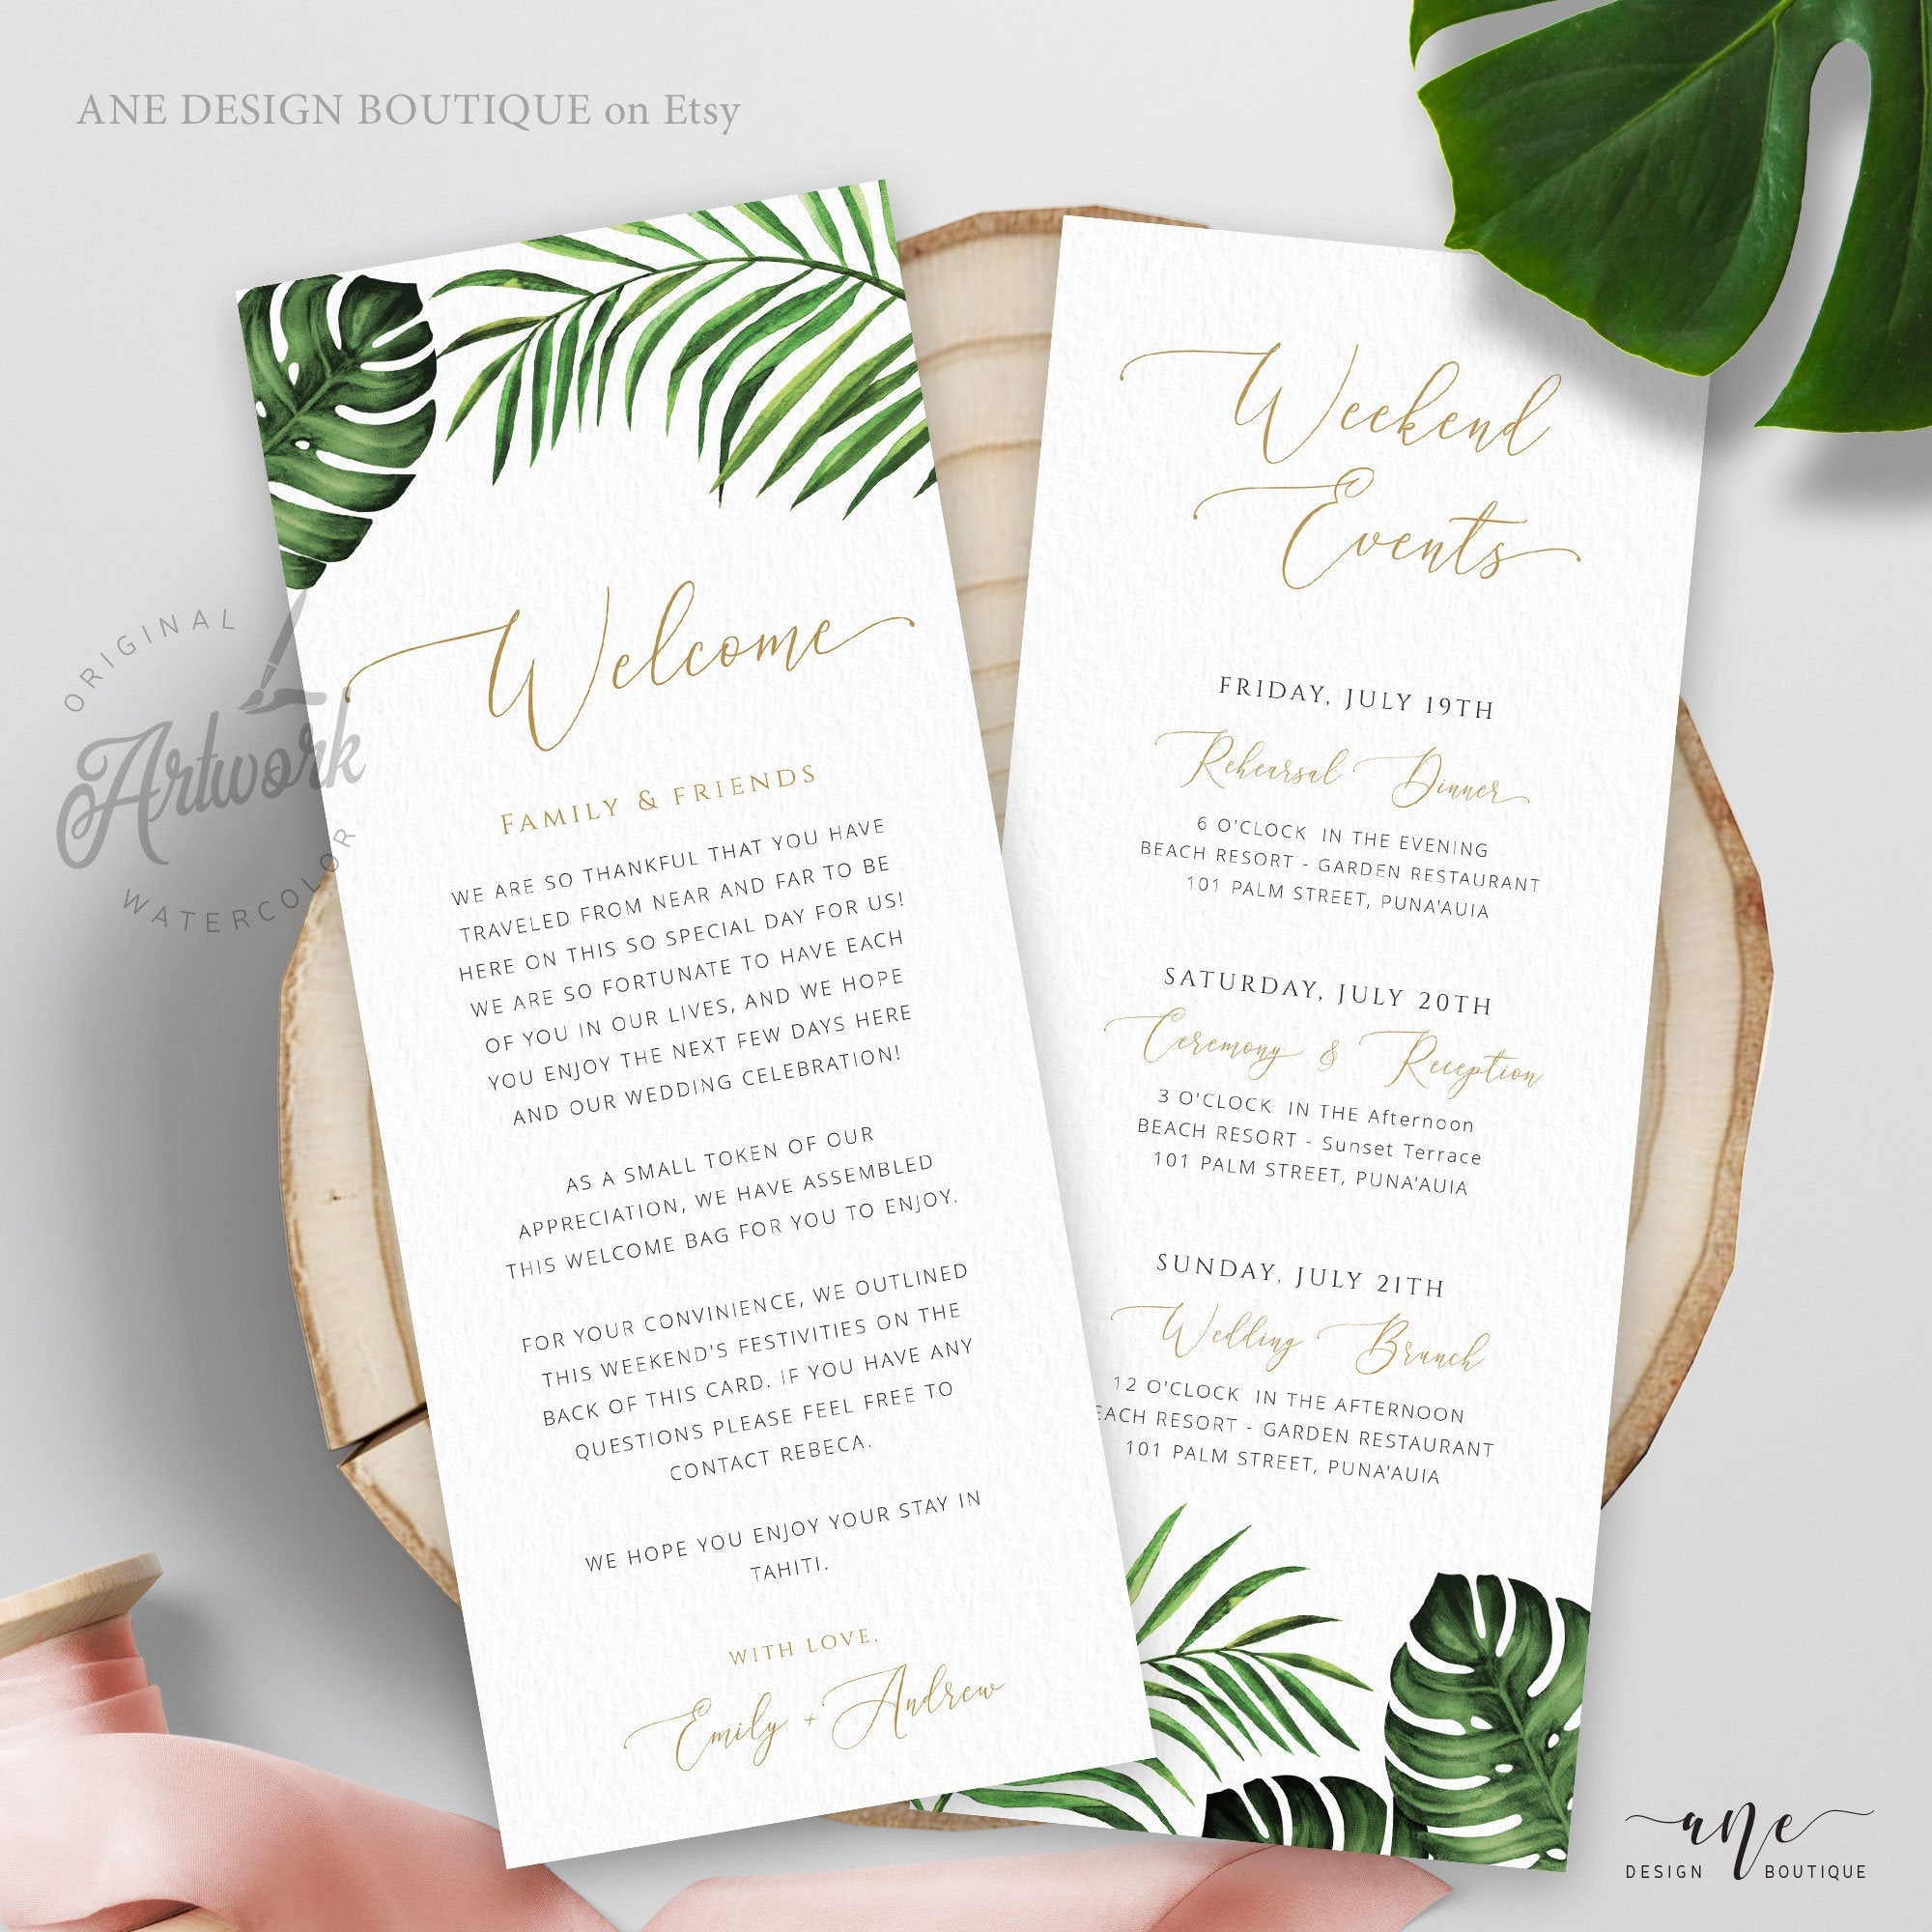 Wedding Welcome Letter & Timeline Template, Order of Events, Welcome Bag  Note and Itinerary, INSTANT DOWNLOAD, 100% Editable Text #076-123WB